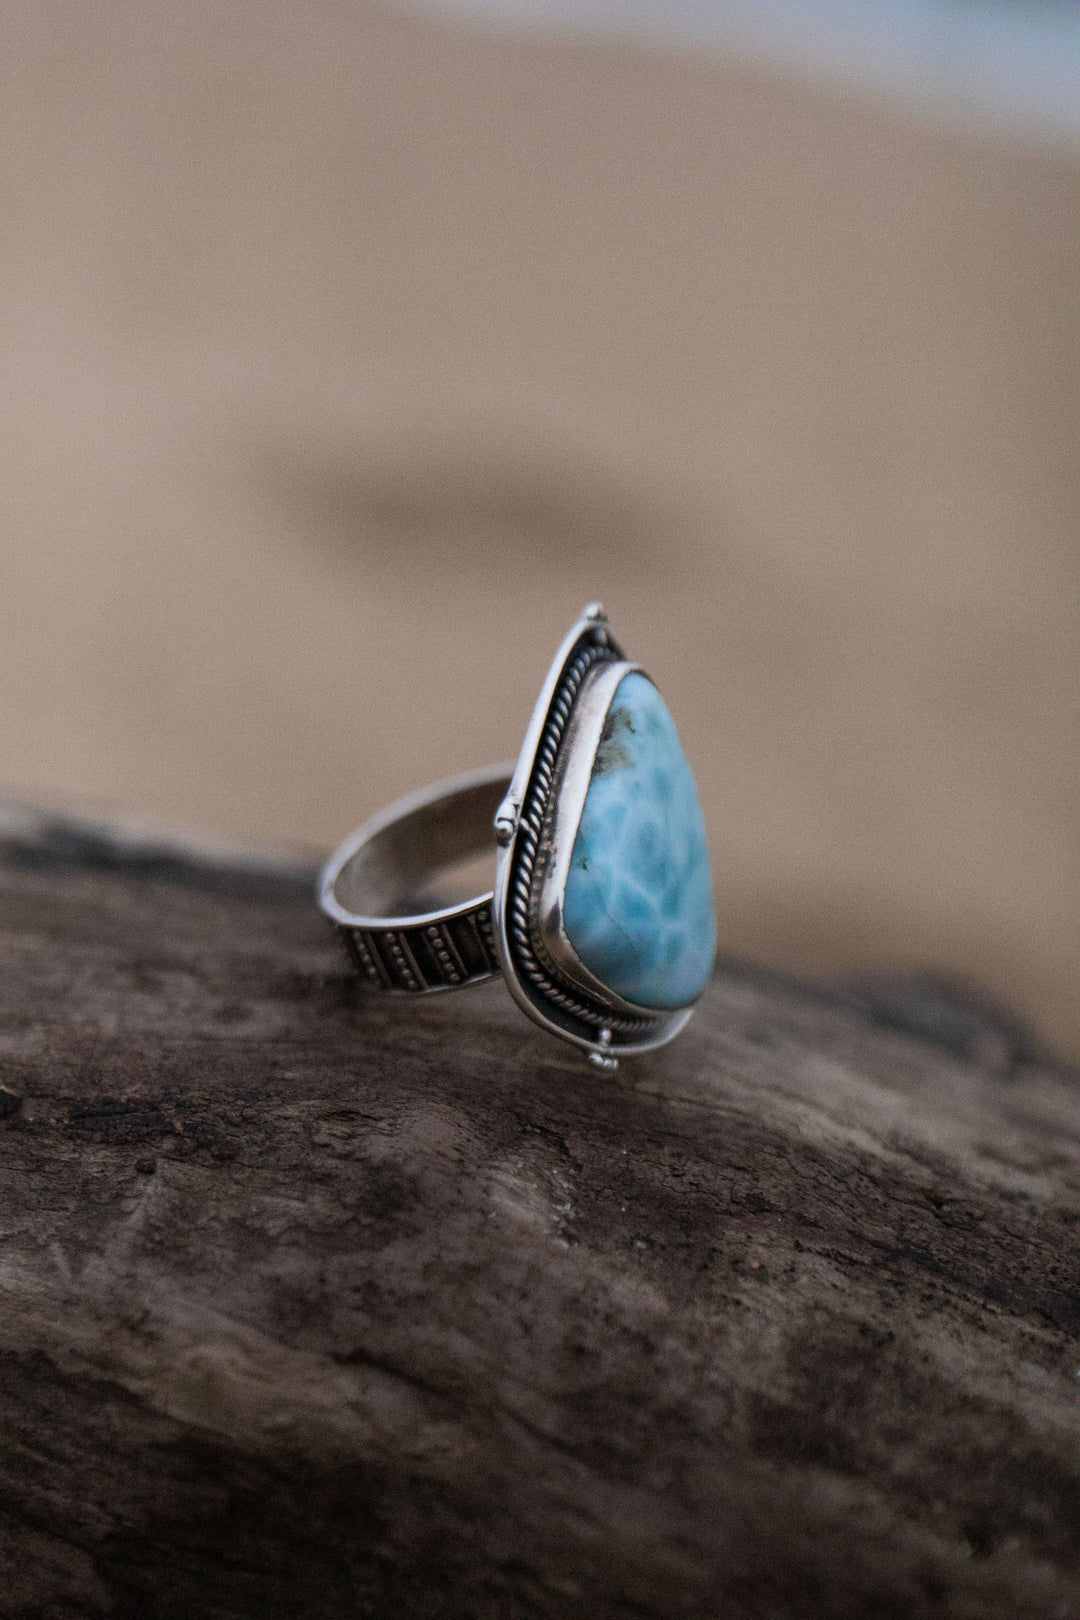 Larimar Ring in Tribal Sterling Silver Setting - Size 7.5 US